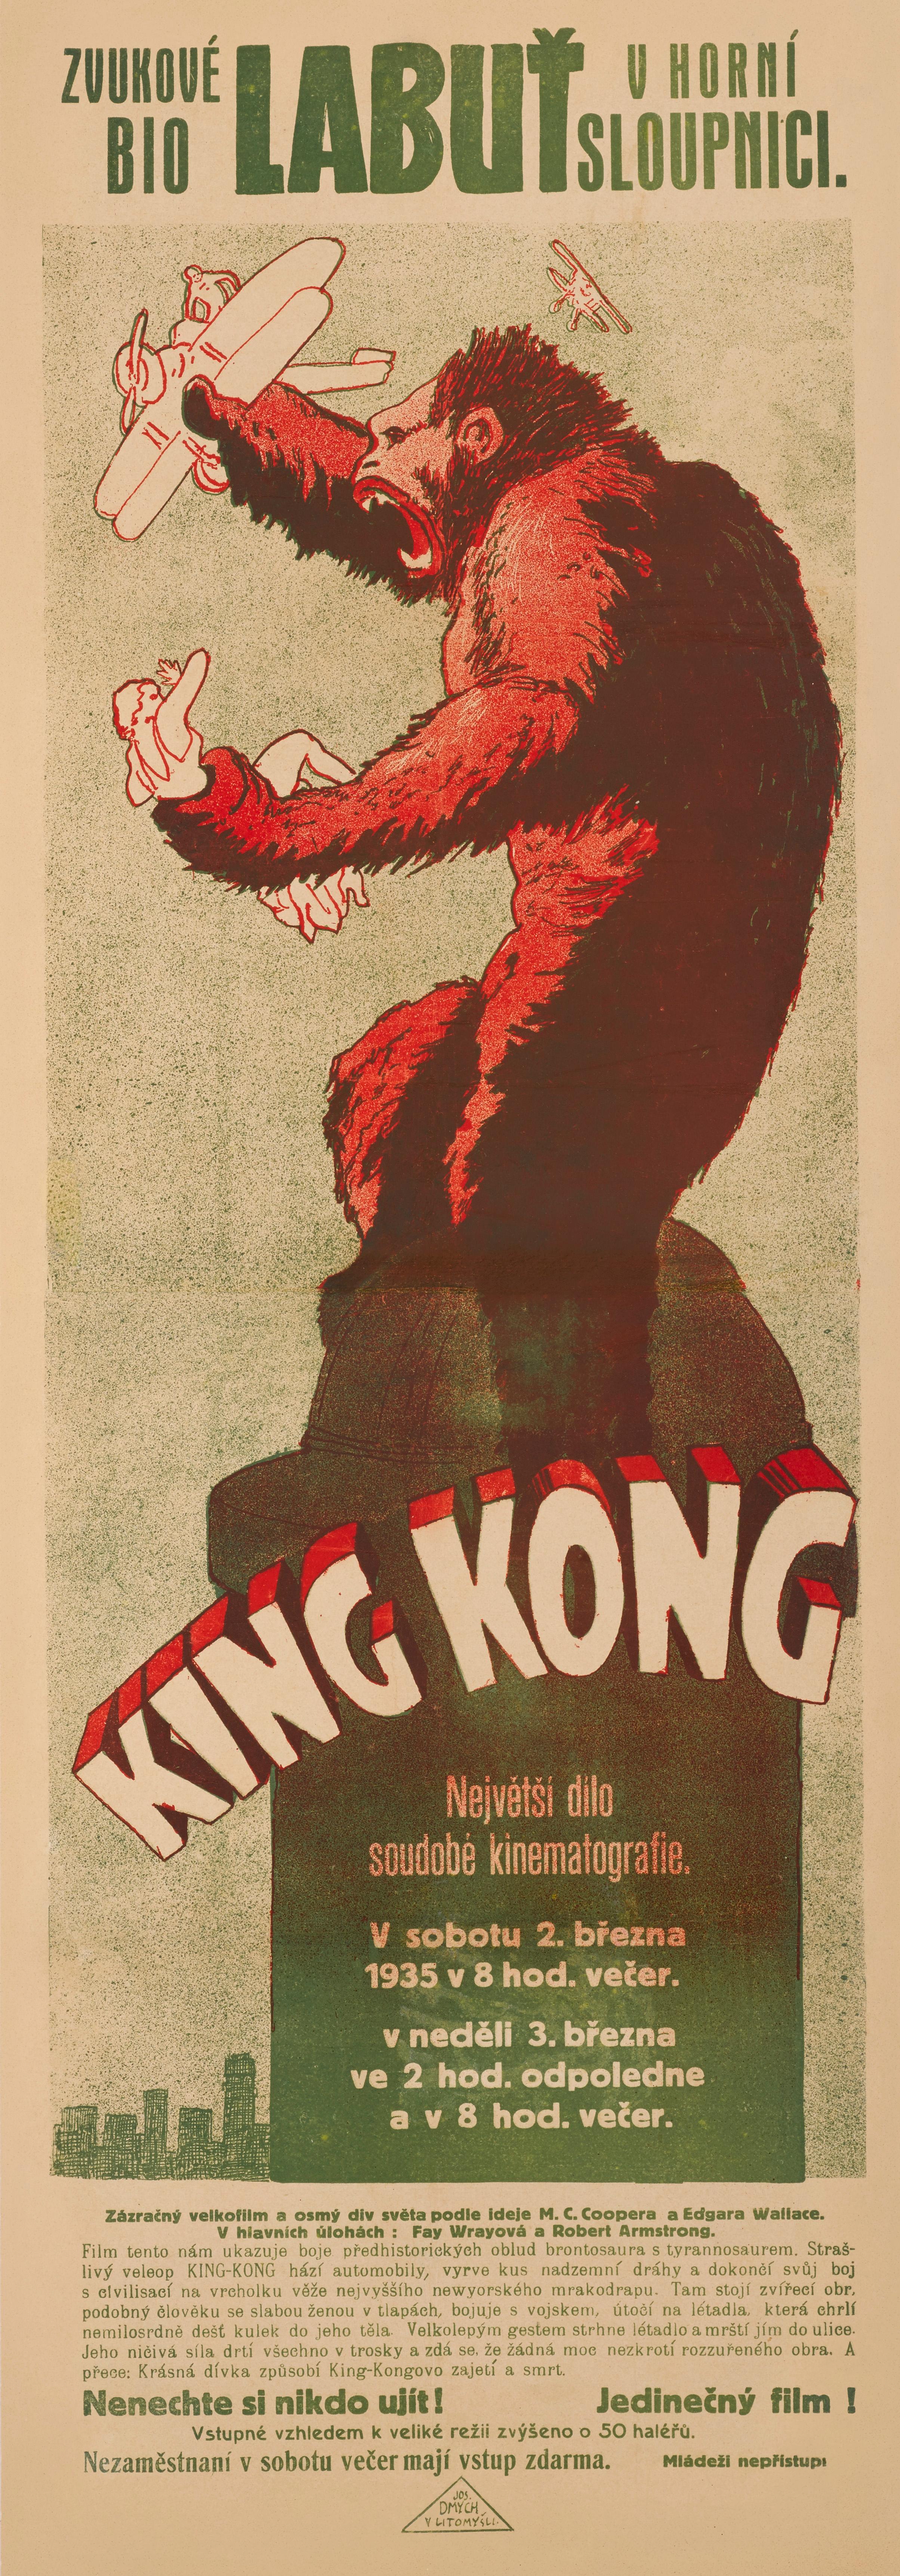 Original Czechoslovakian film poster from the films first Czech release in 1933.
A perfect blend of adventure, science fiction and horror, King Kong is the ultimate monster movie. Willis O'Brien's use of stop-motion effects was ground breaking for